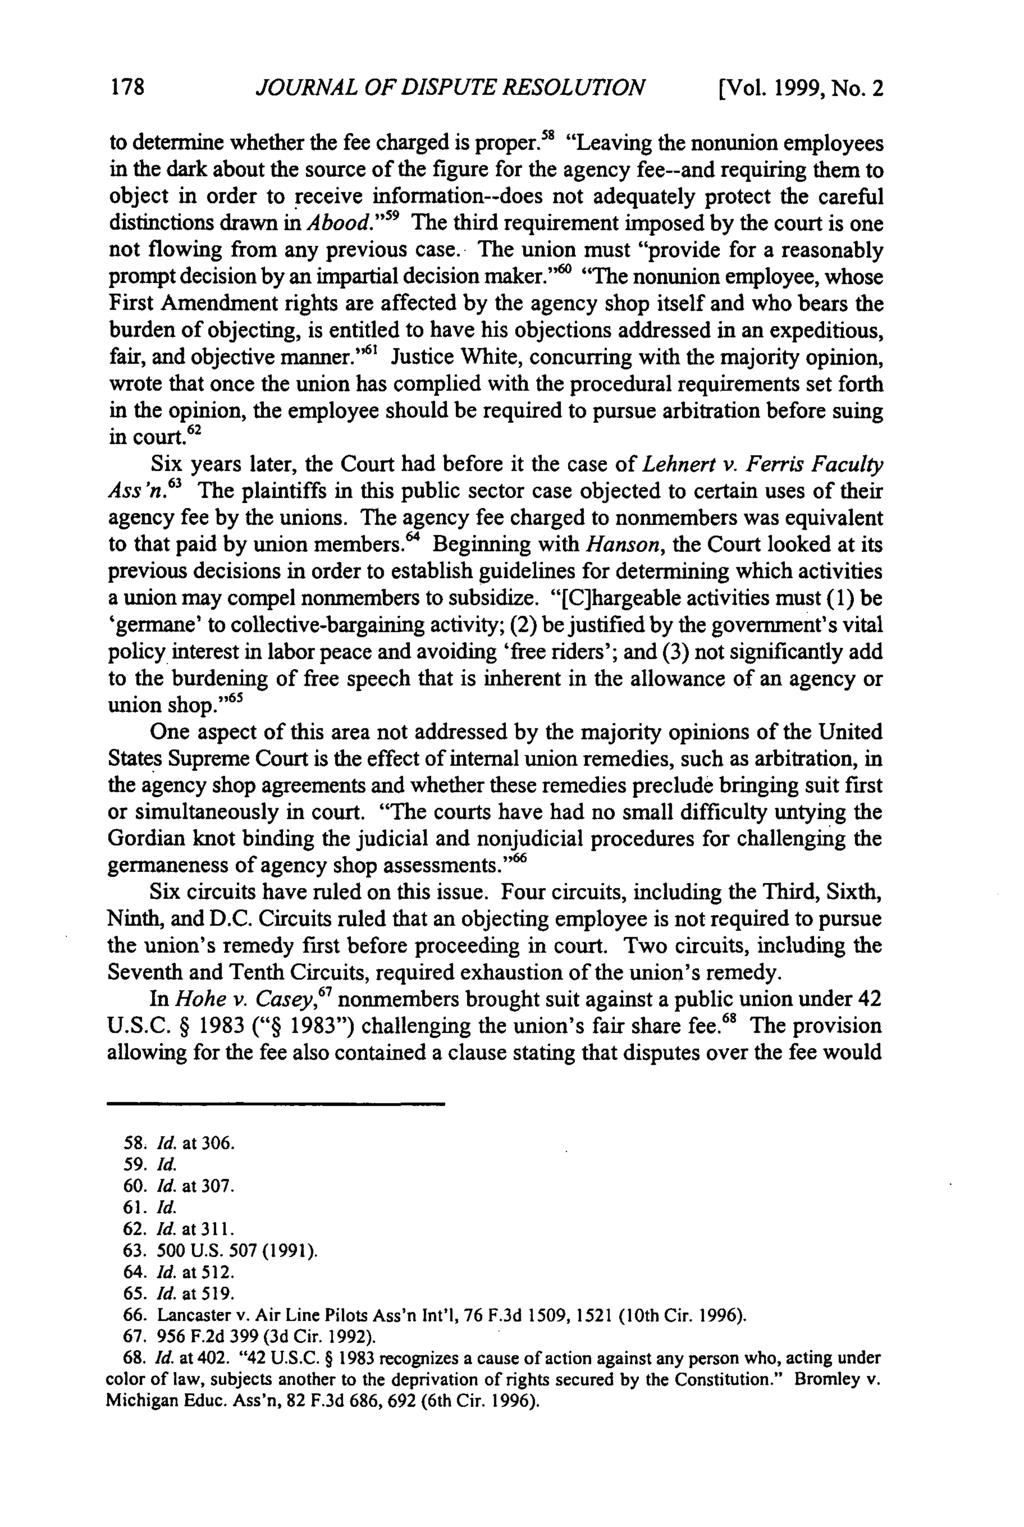 Journal of Dispute Resolution, Vol. 1999, Iss. 2 [1999], Art. 3 JOURNAL OF DISPUTE RESOLUTION [Vol. 1999, No. 2 to determine whether the fee charged is proper.